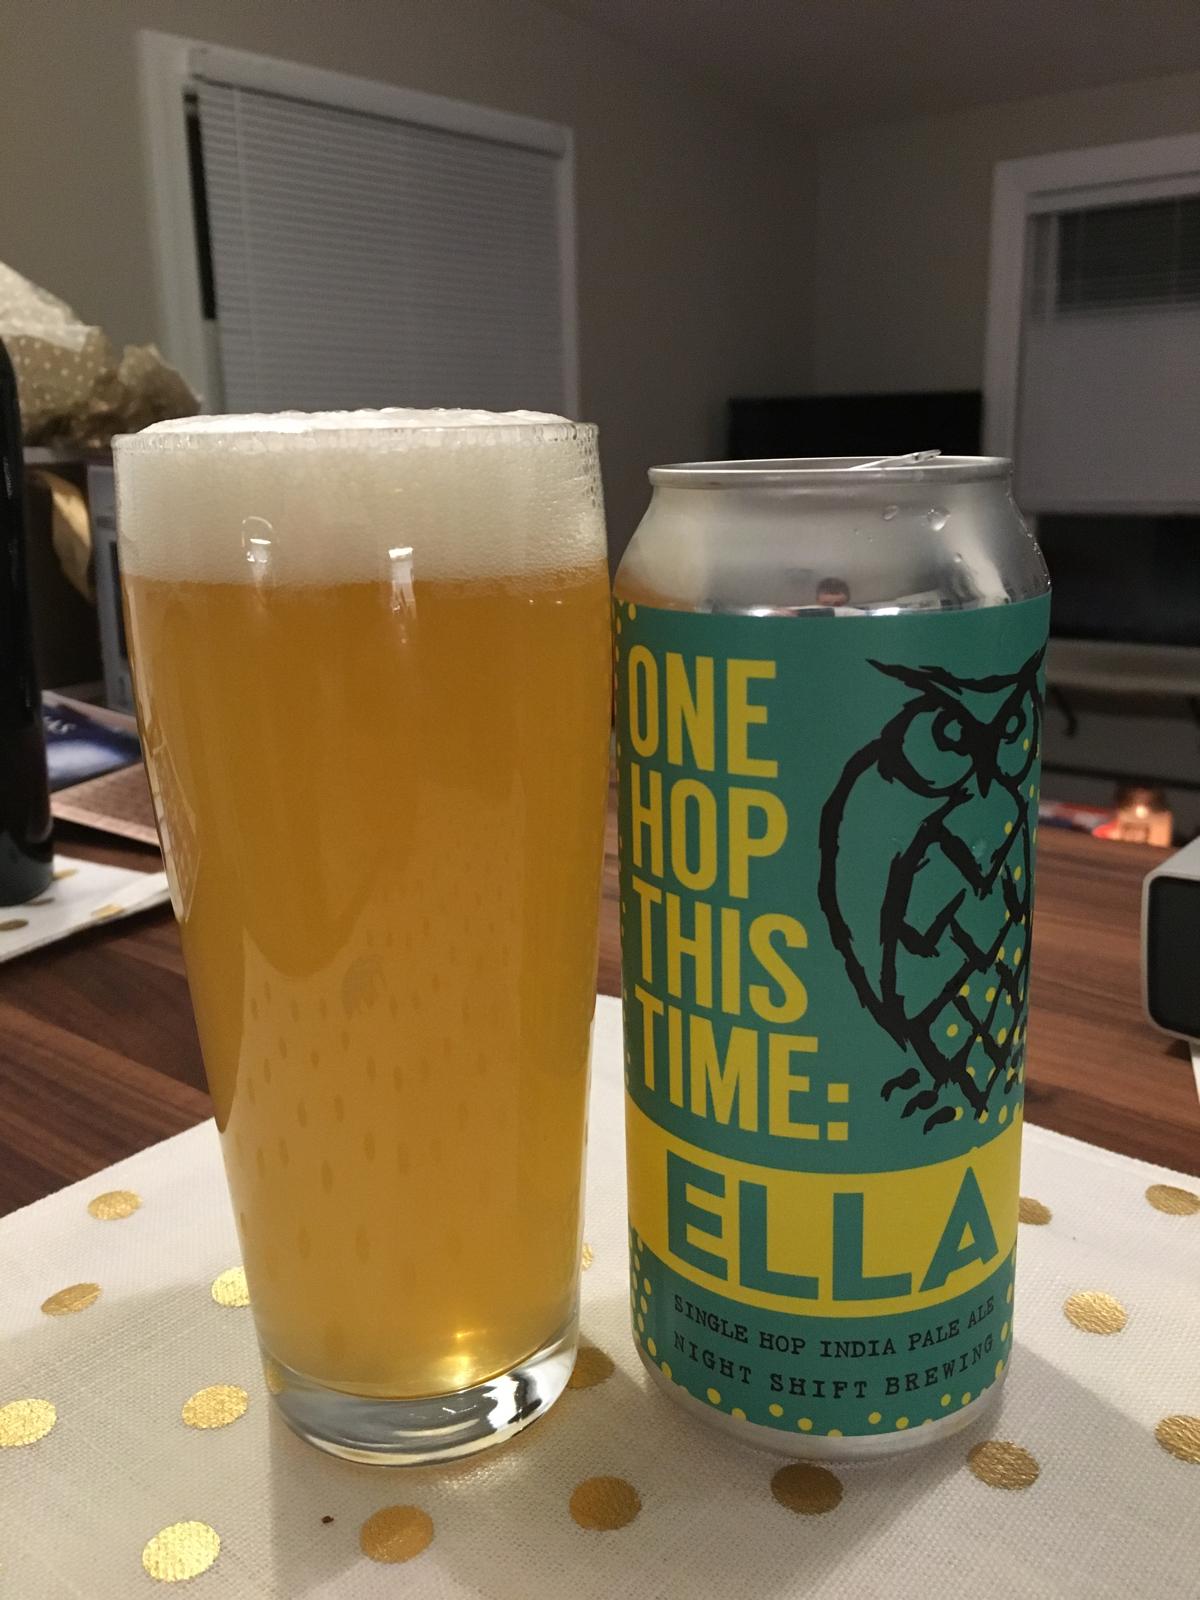 One Hop This Time: Ella